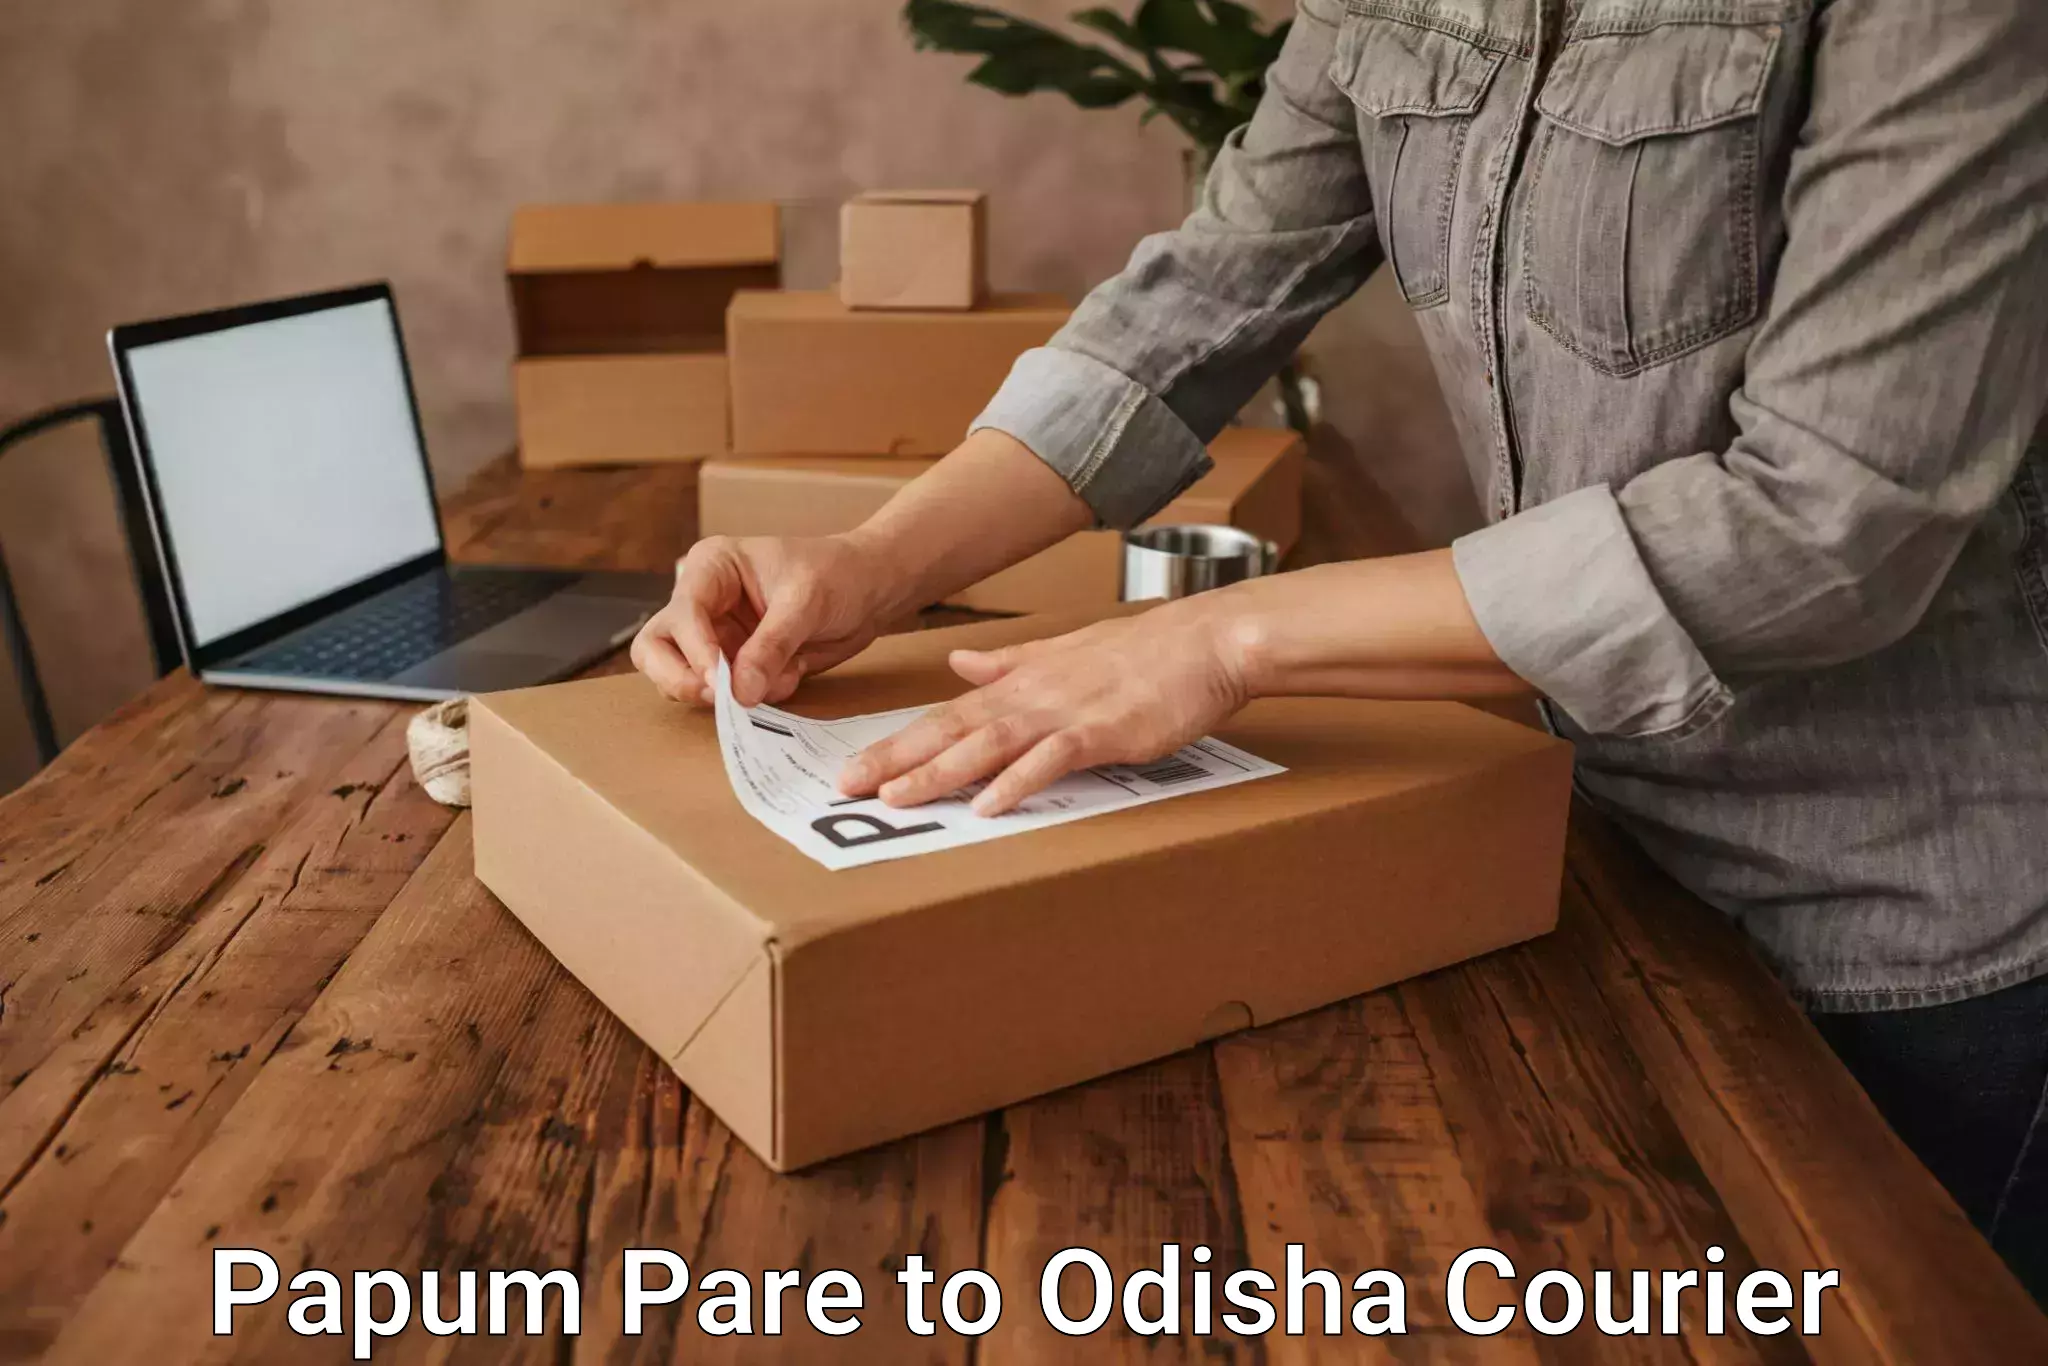 Cash on delivery service Papum Pare to Odisha